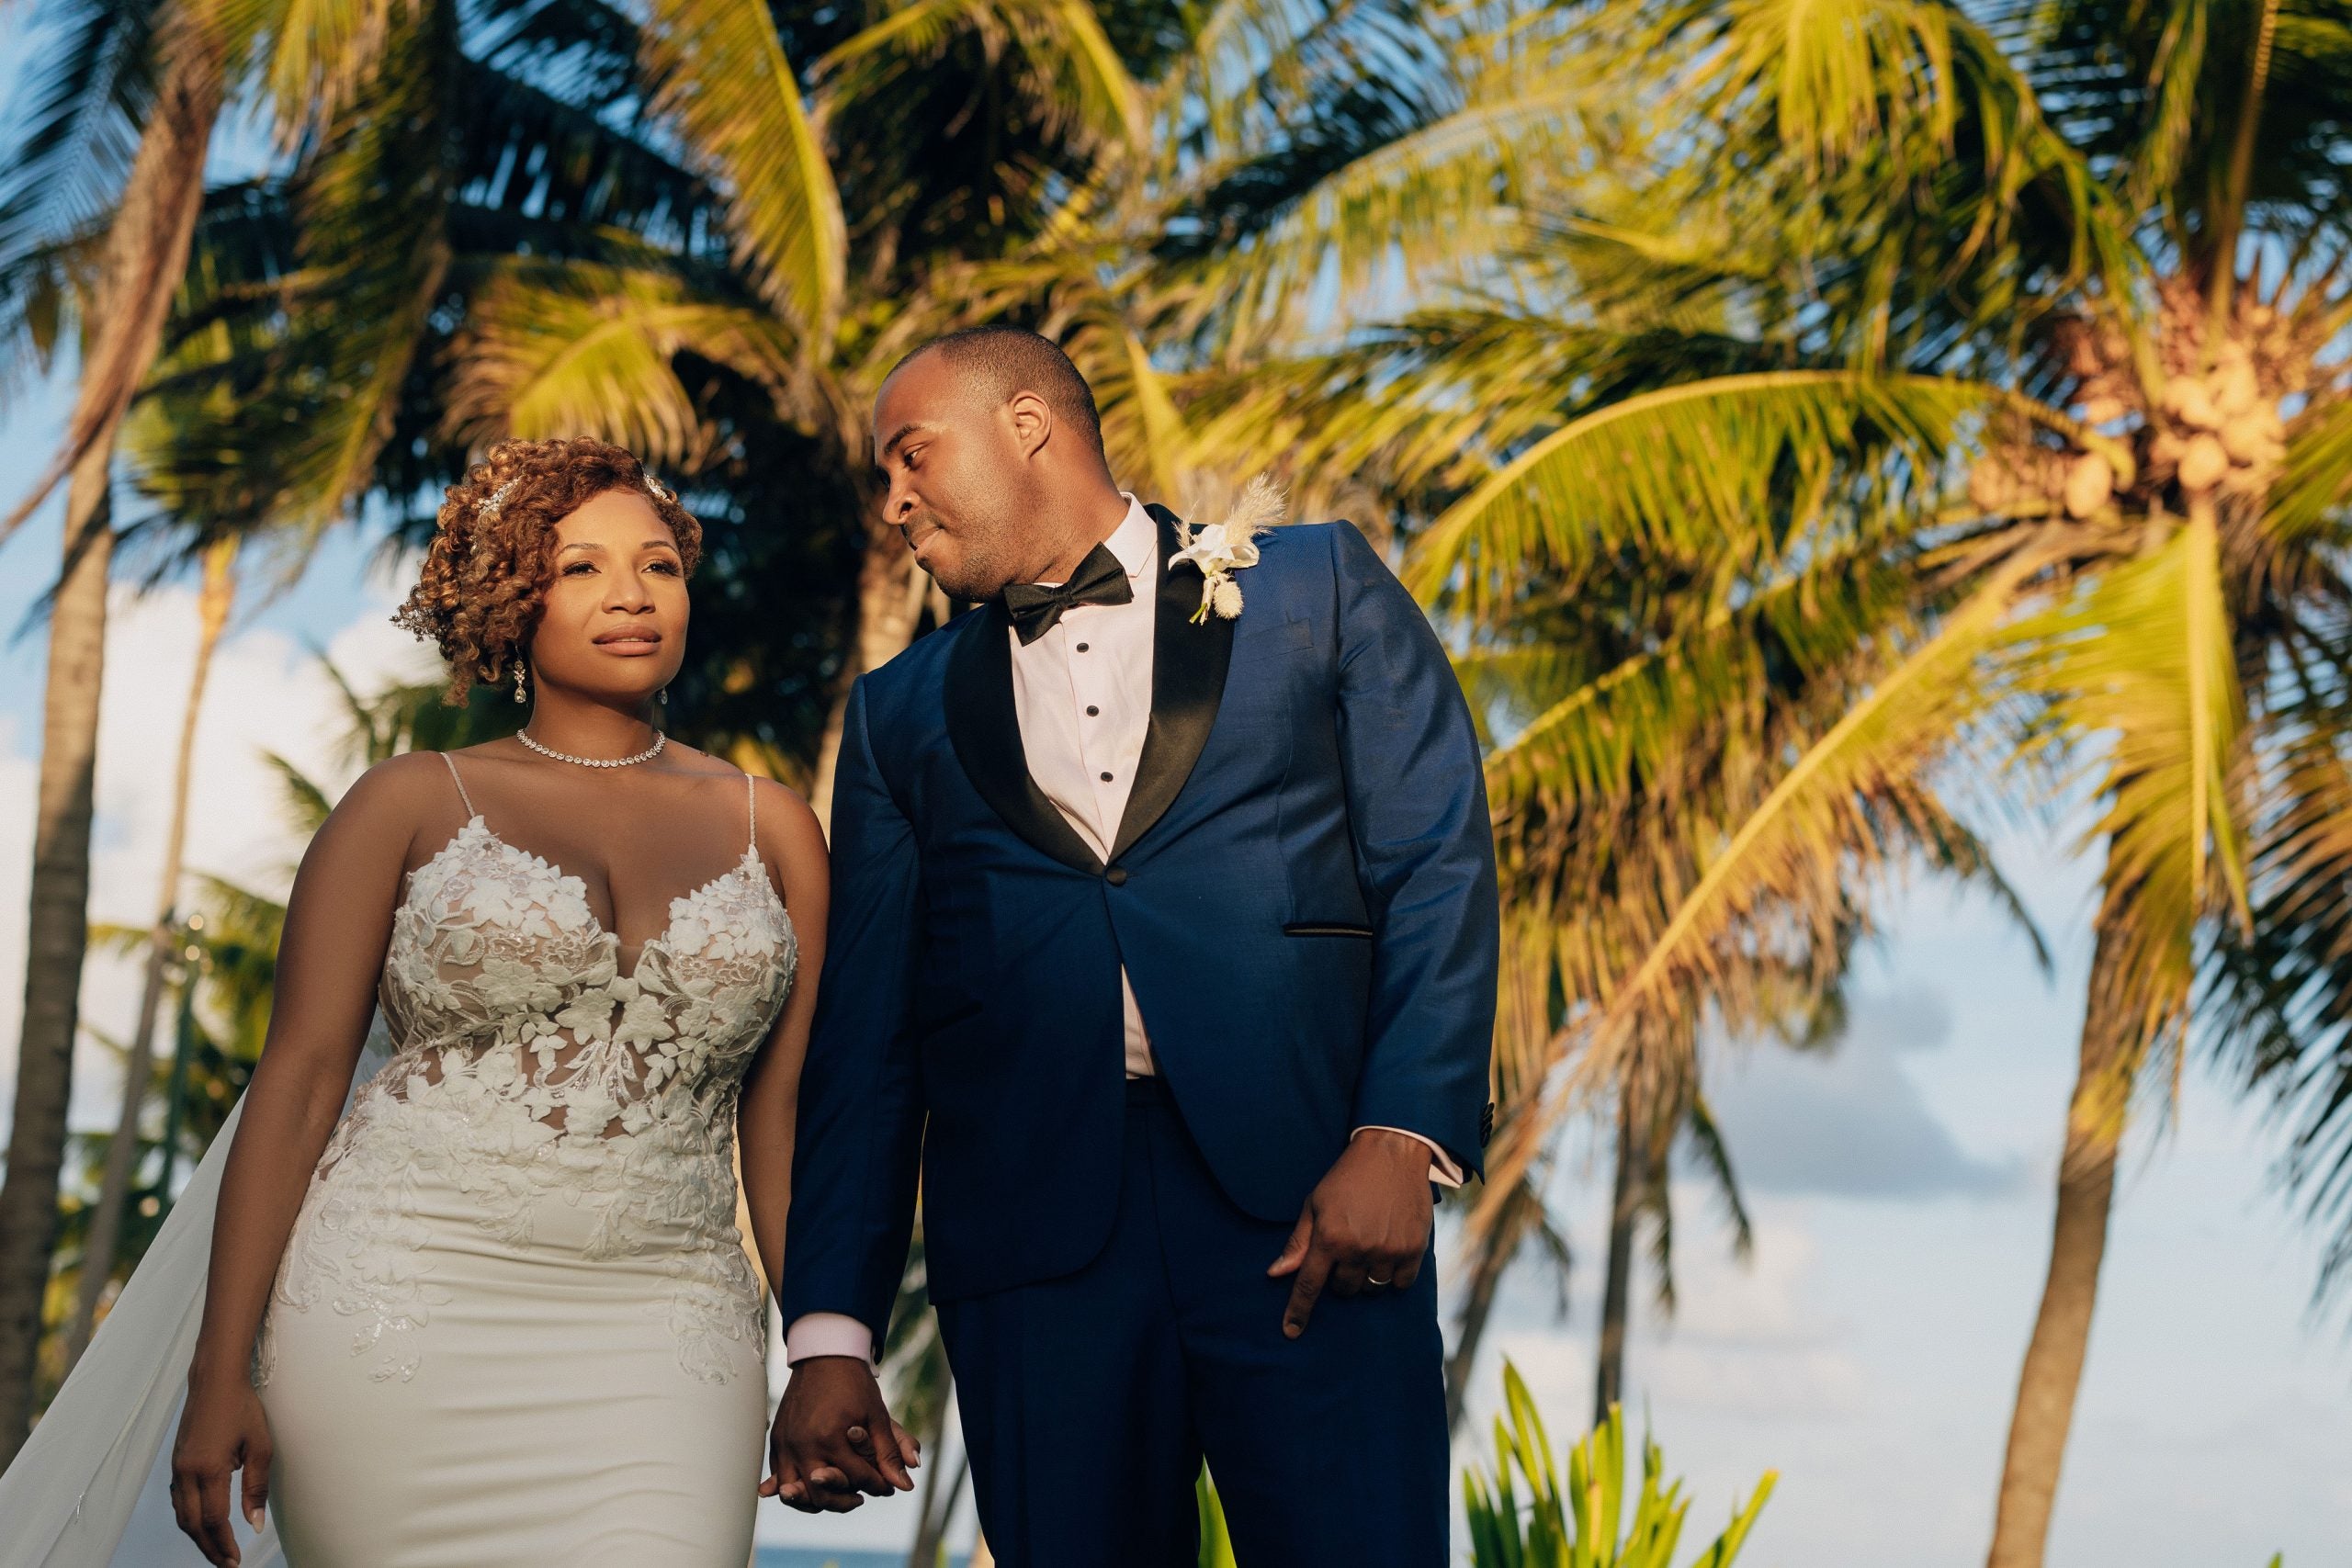 Bridal Bliss: Lori And Che's Destination Wedding In Playa Del Carmen Was A Lavish Celebration And Vacation In One